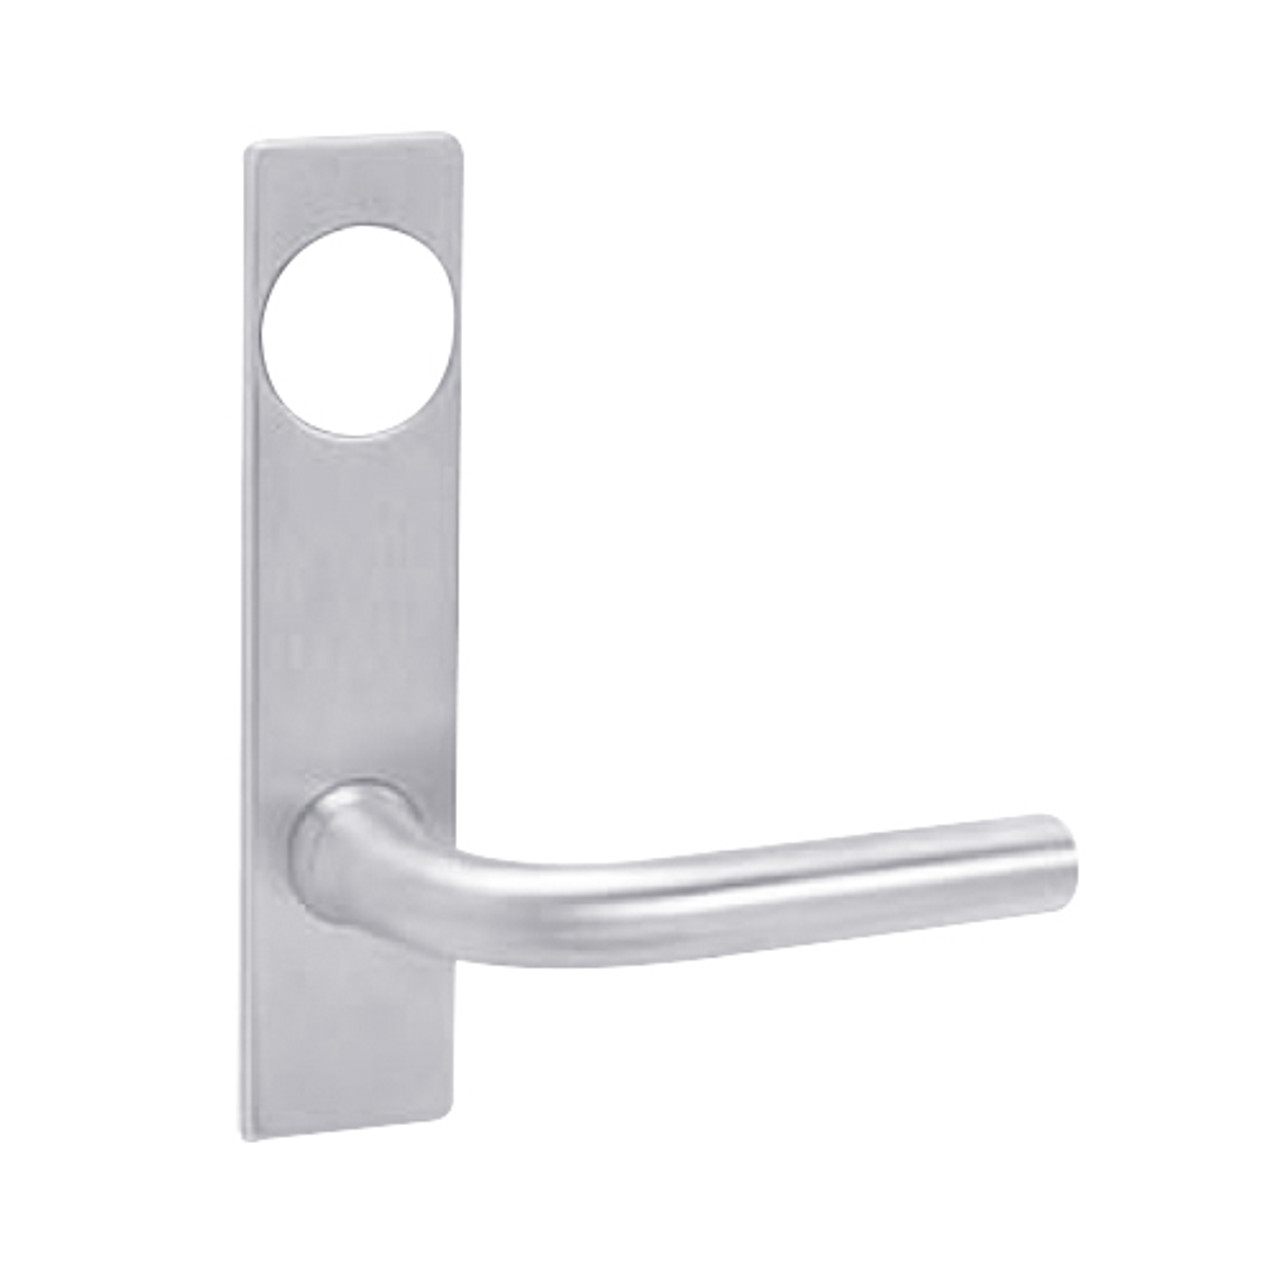 ML2048-RWP-625-CL7 Corbin Russwin ML2000 Series IC 7-Pin Less Core Mortise Entrance Locksets with Regis Lever in Bright Chrome